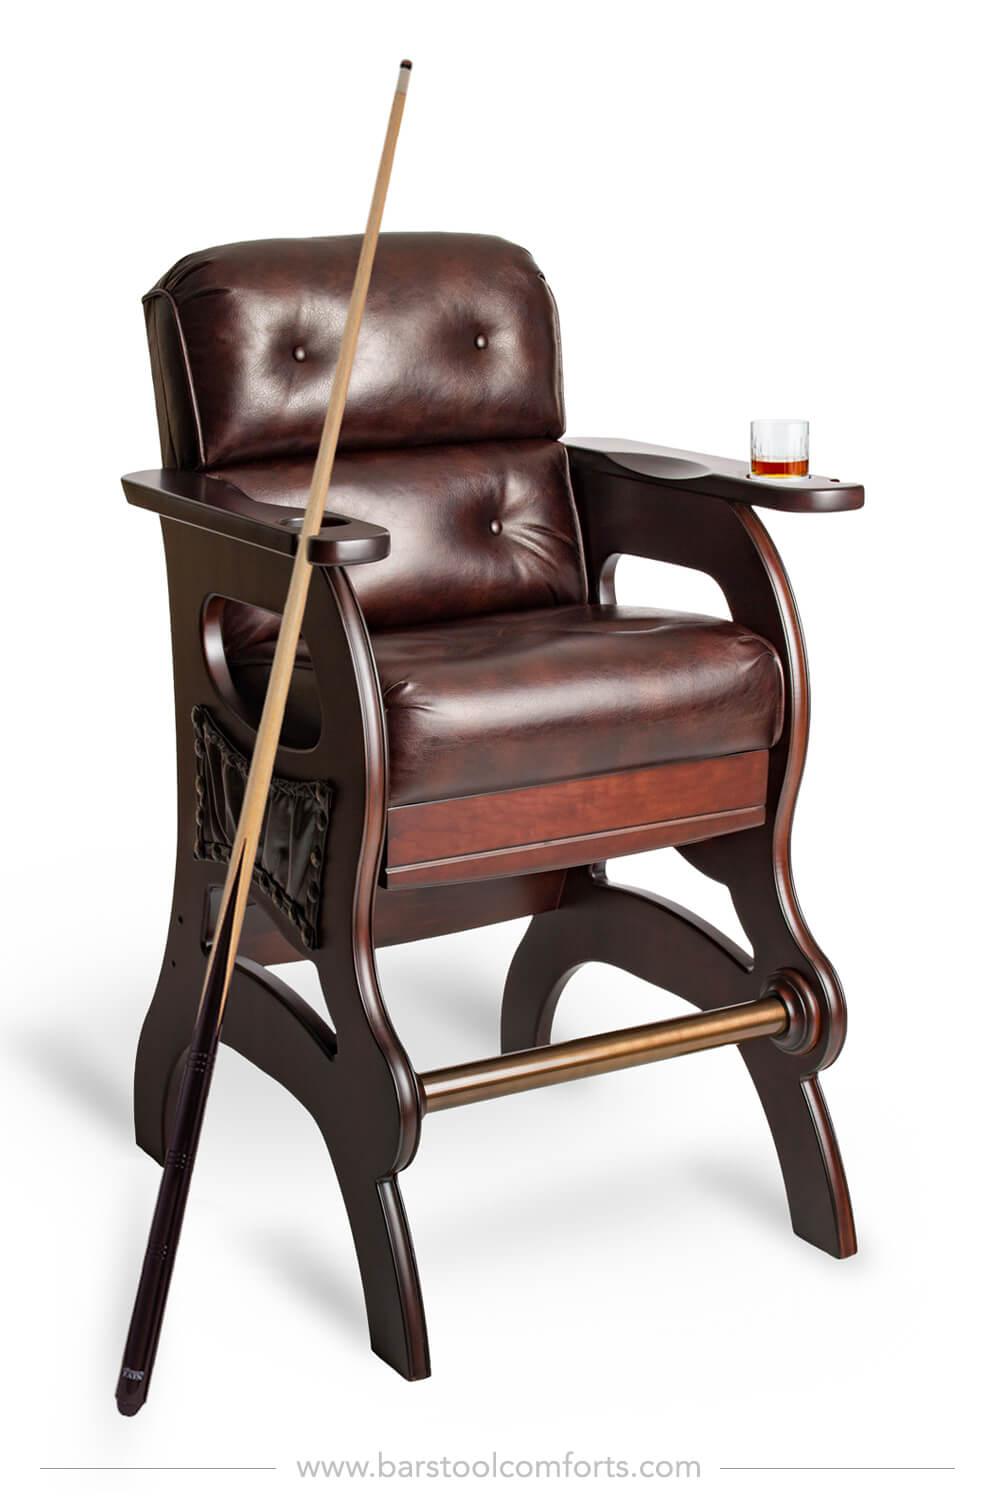 Mann Sports Theater Billiards Chair with Arms